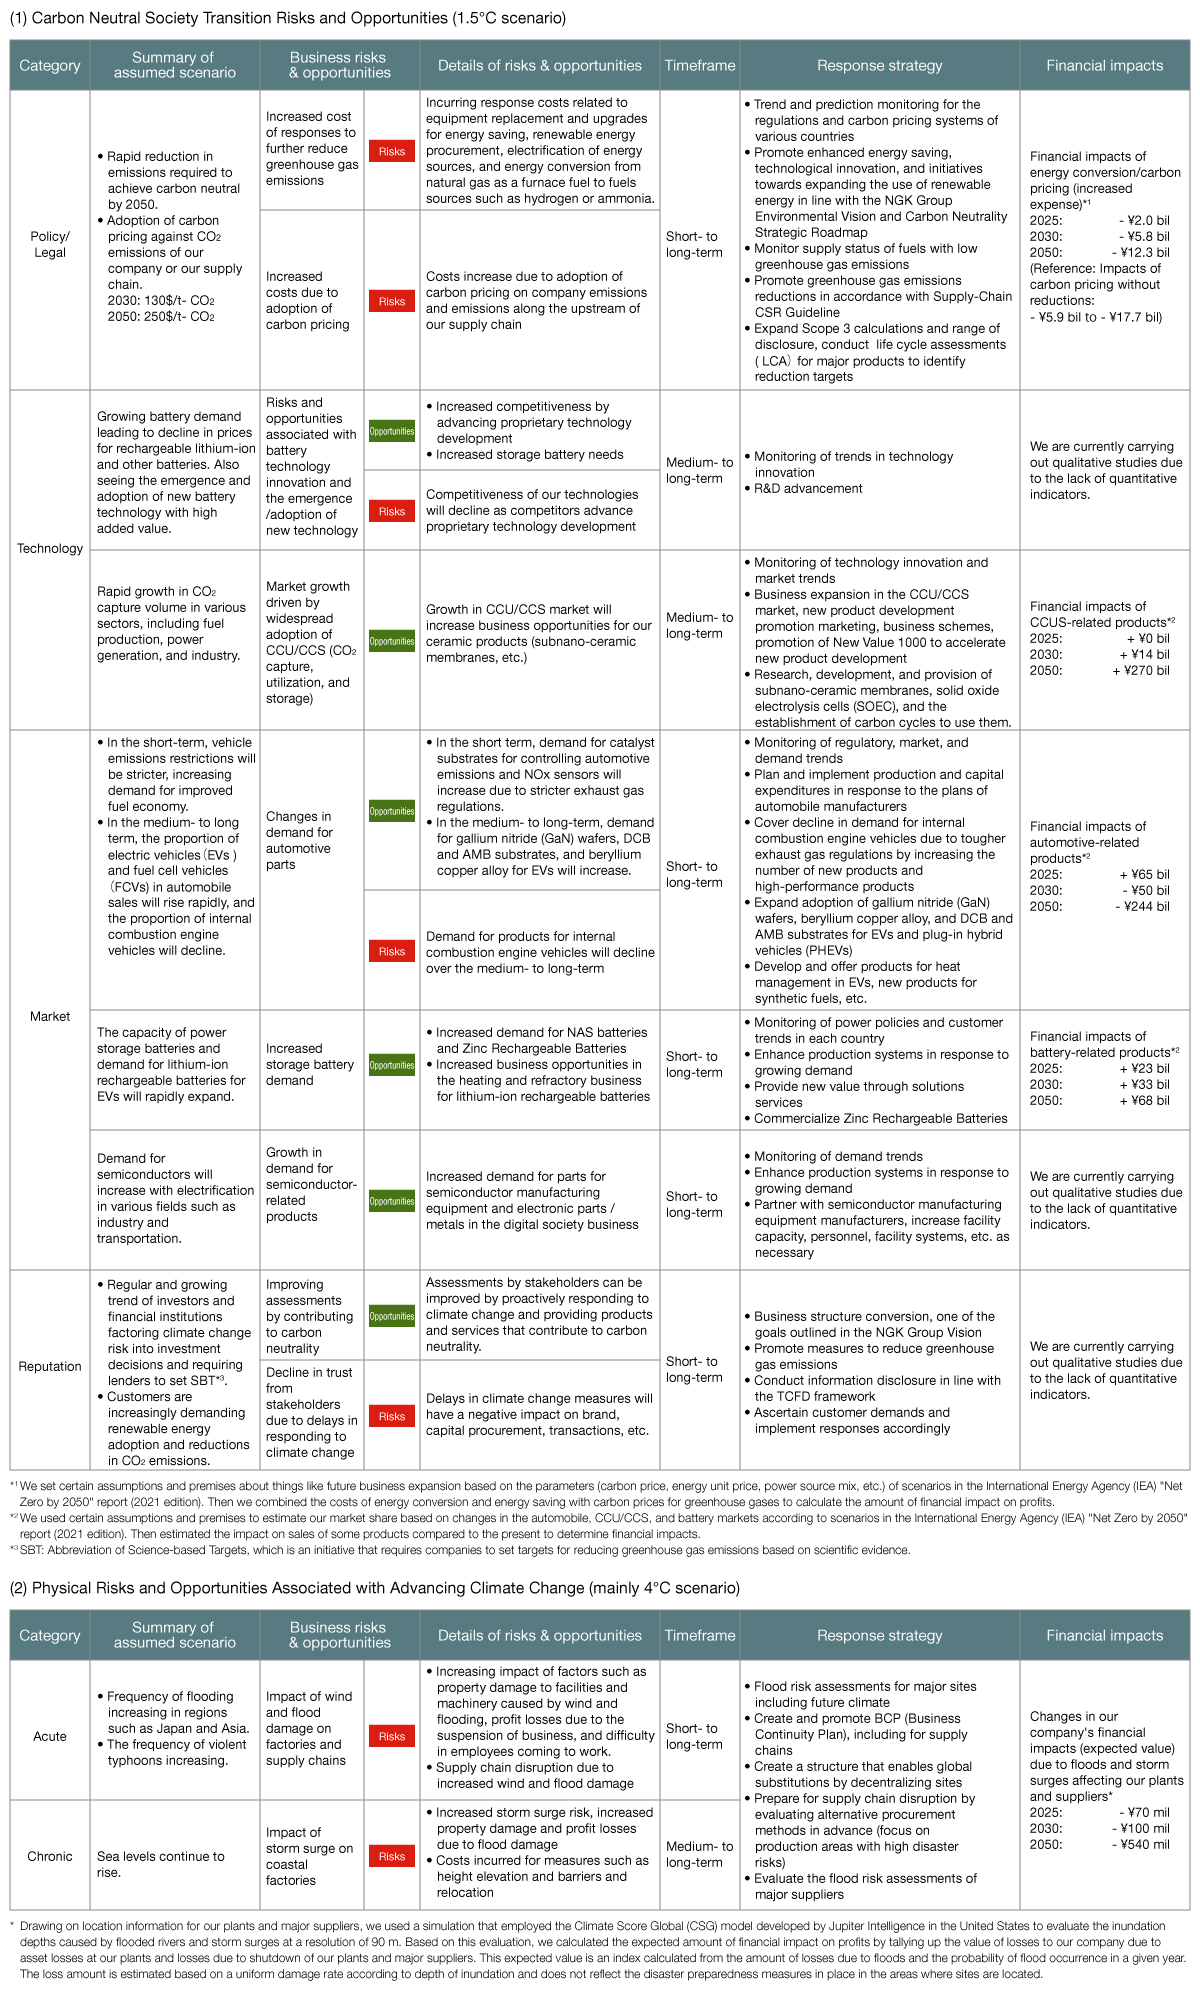 These are tables expressing the risks in transitioning to a carbon neutral society under both 1.5°C and 4°C scenarios. They cover the risks and opportunities that could occur with respect to policy, laws and regulations, technology, markets, and reputation.